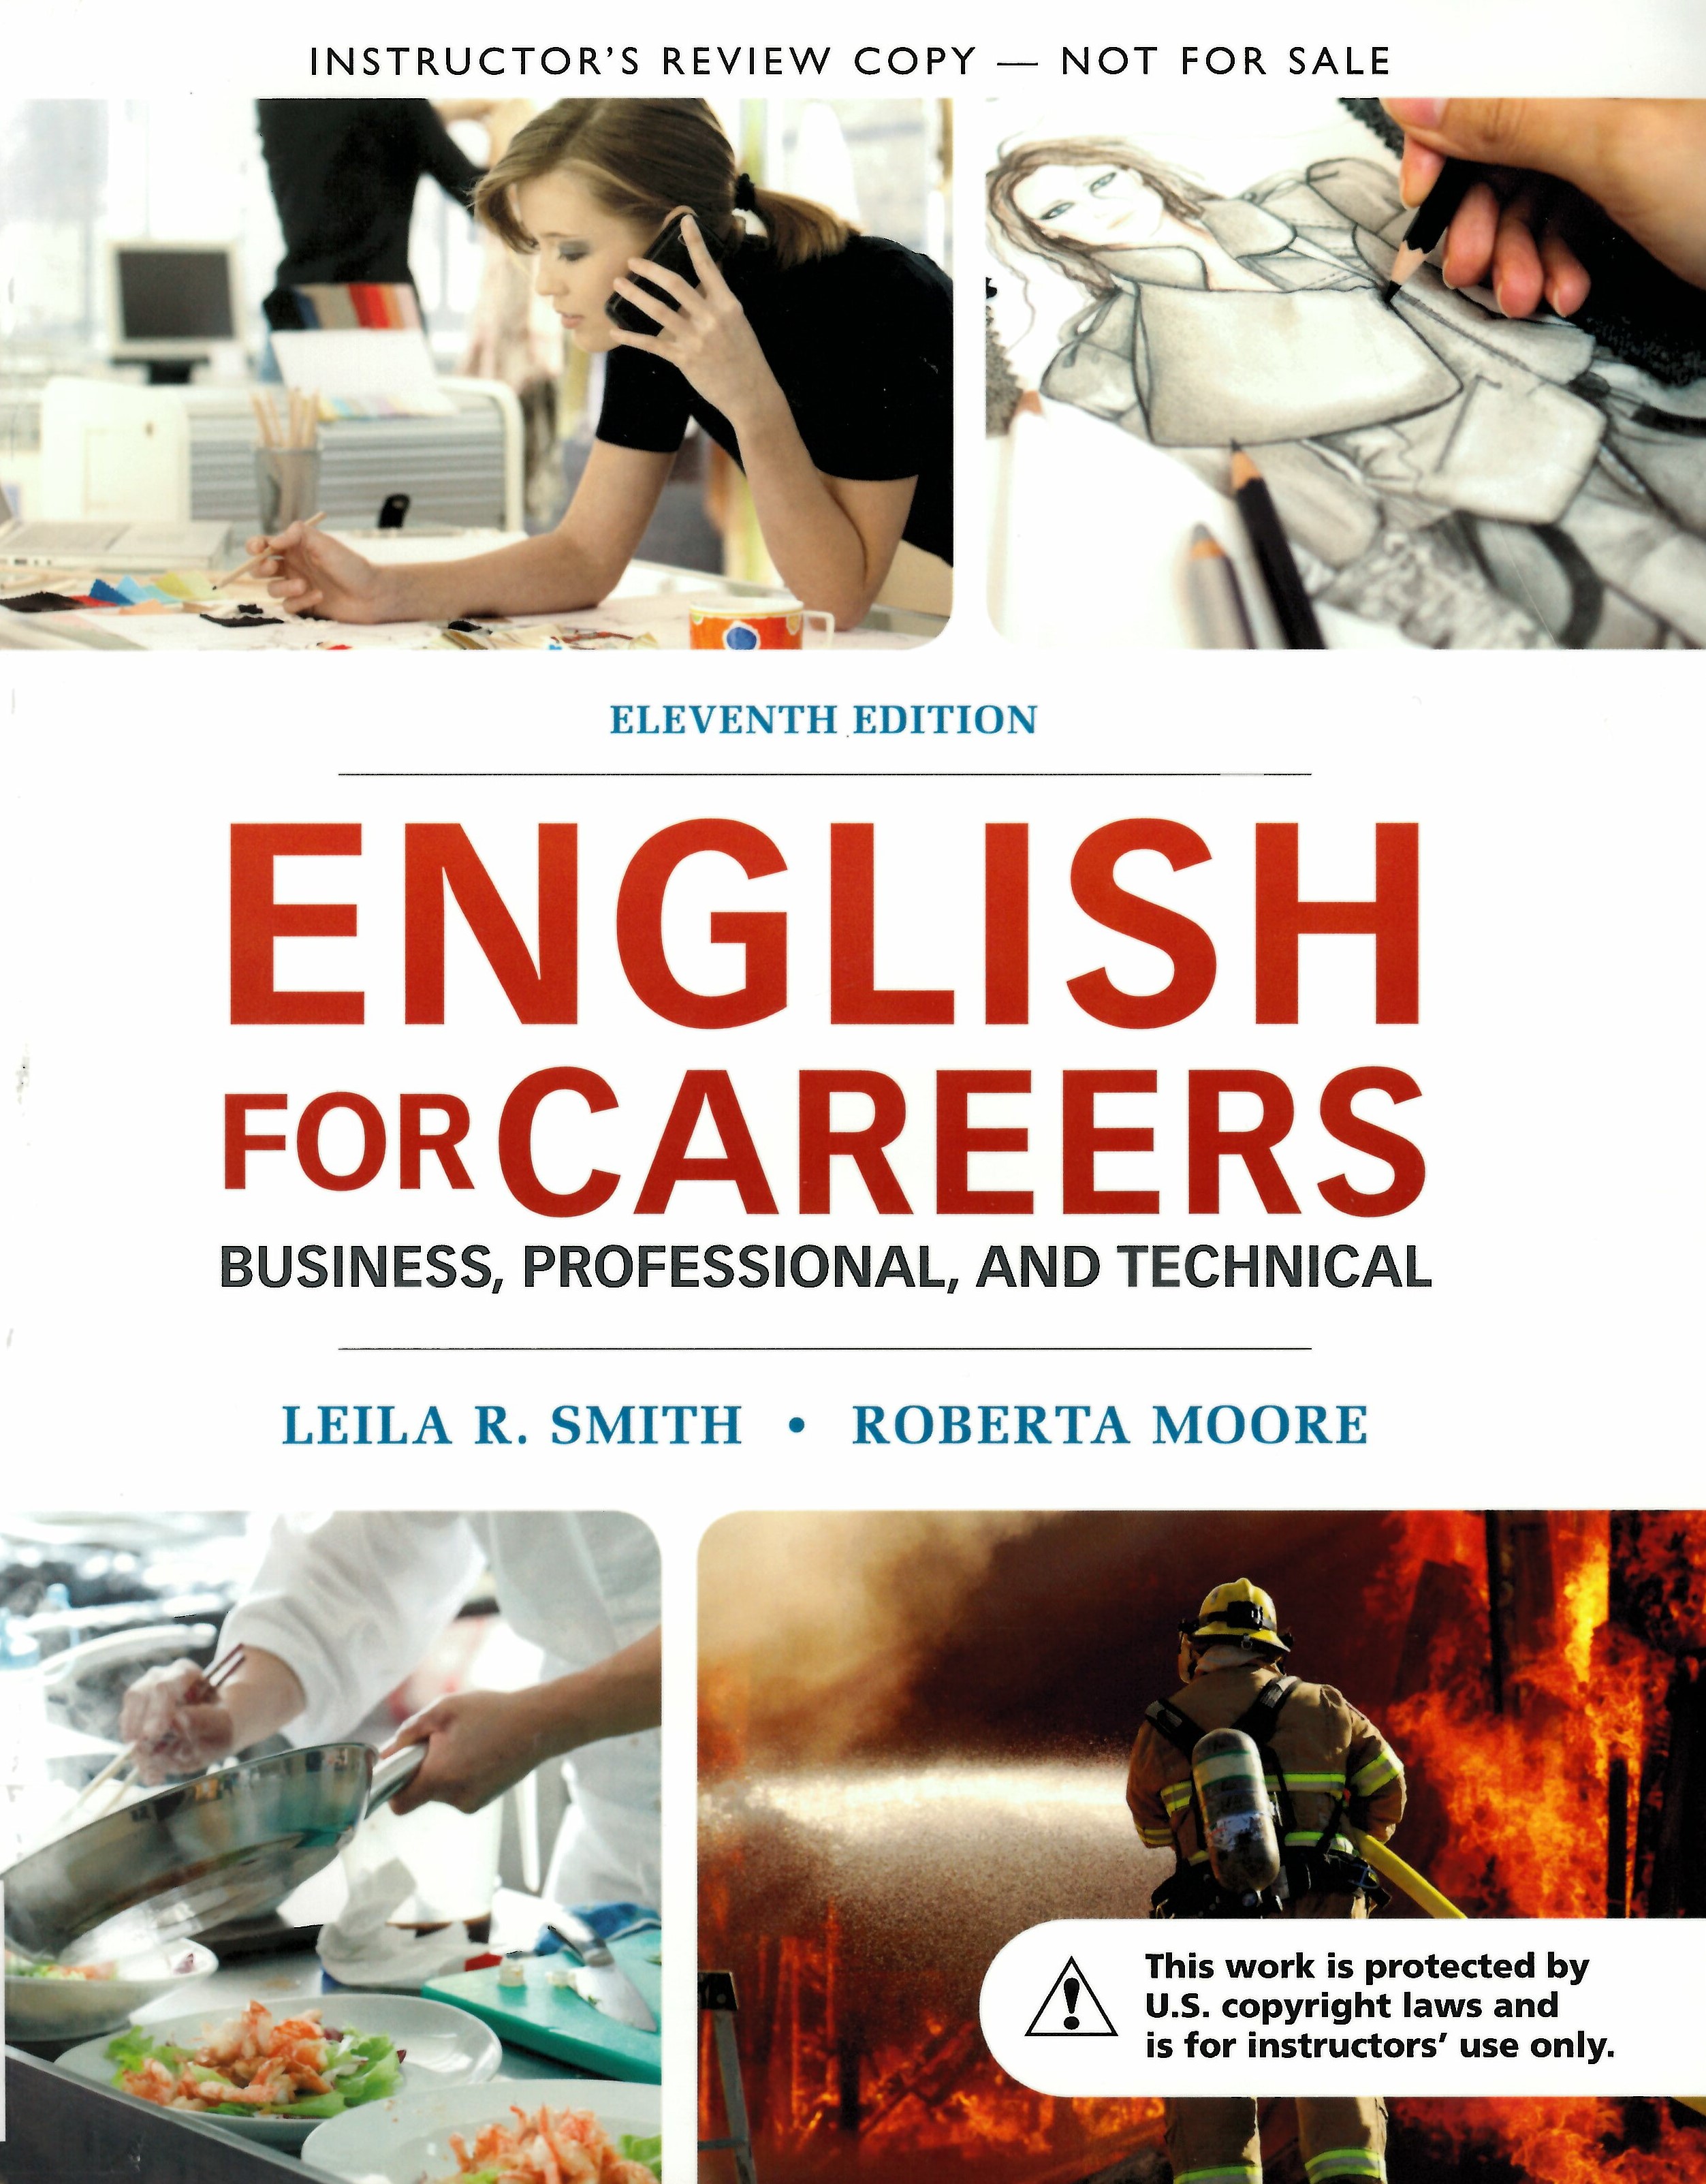 English for careers : business, professional, and technical